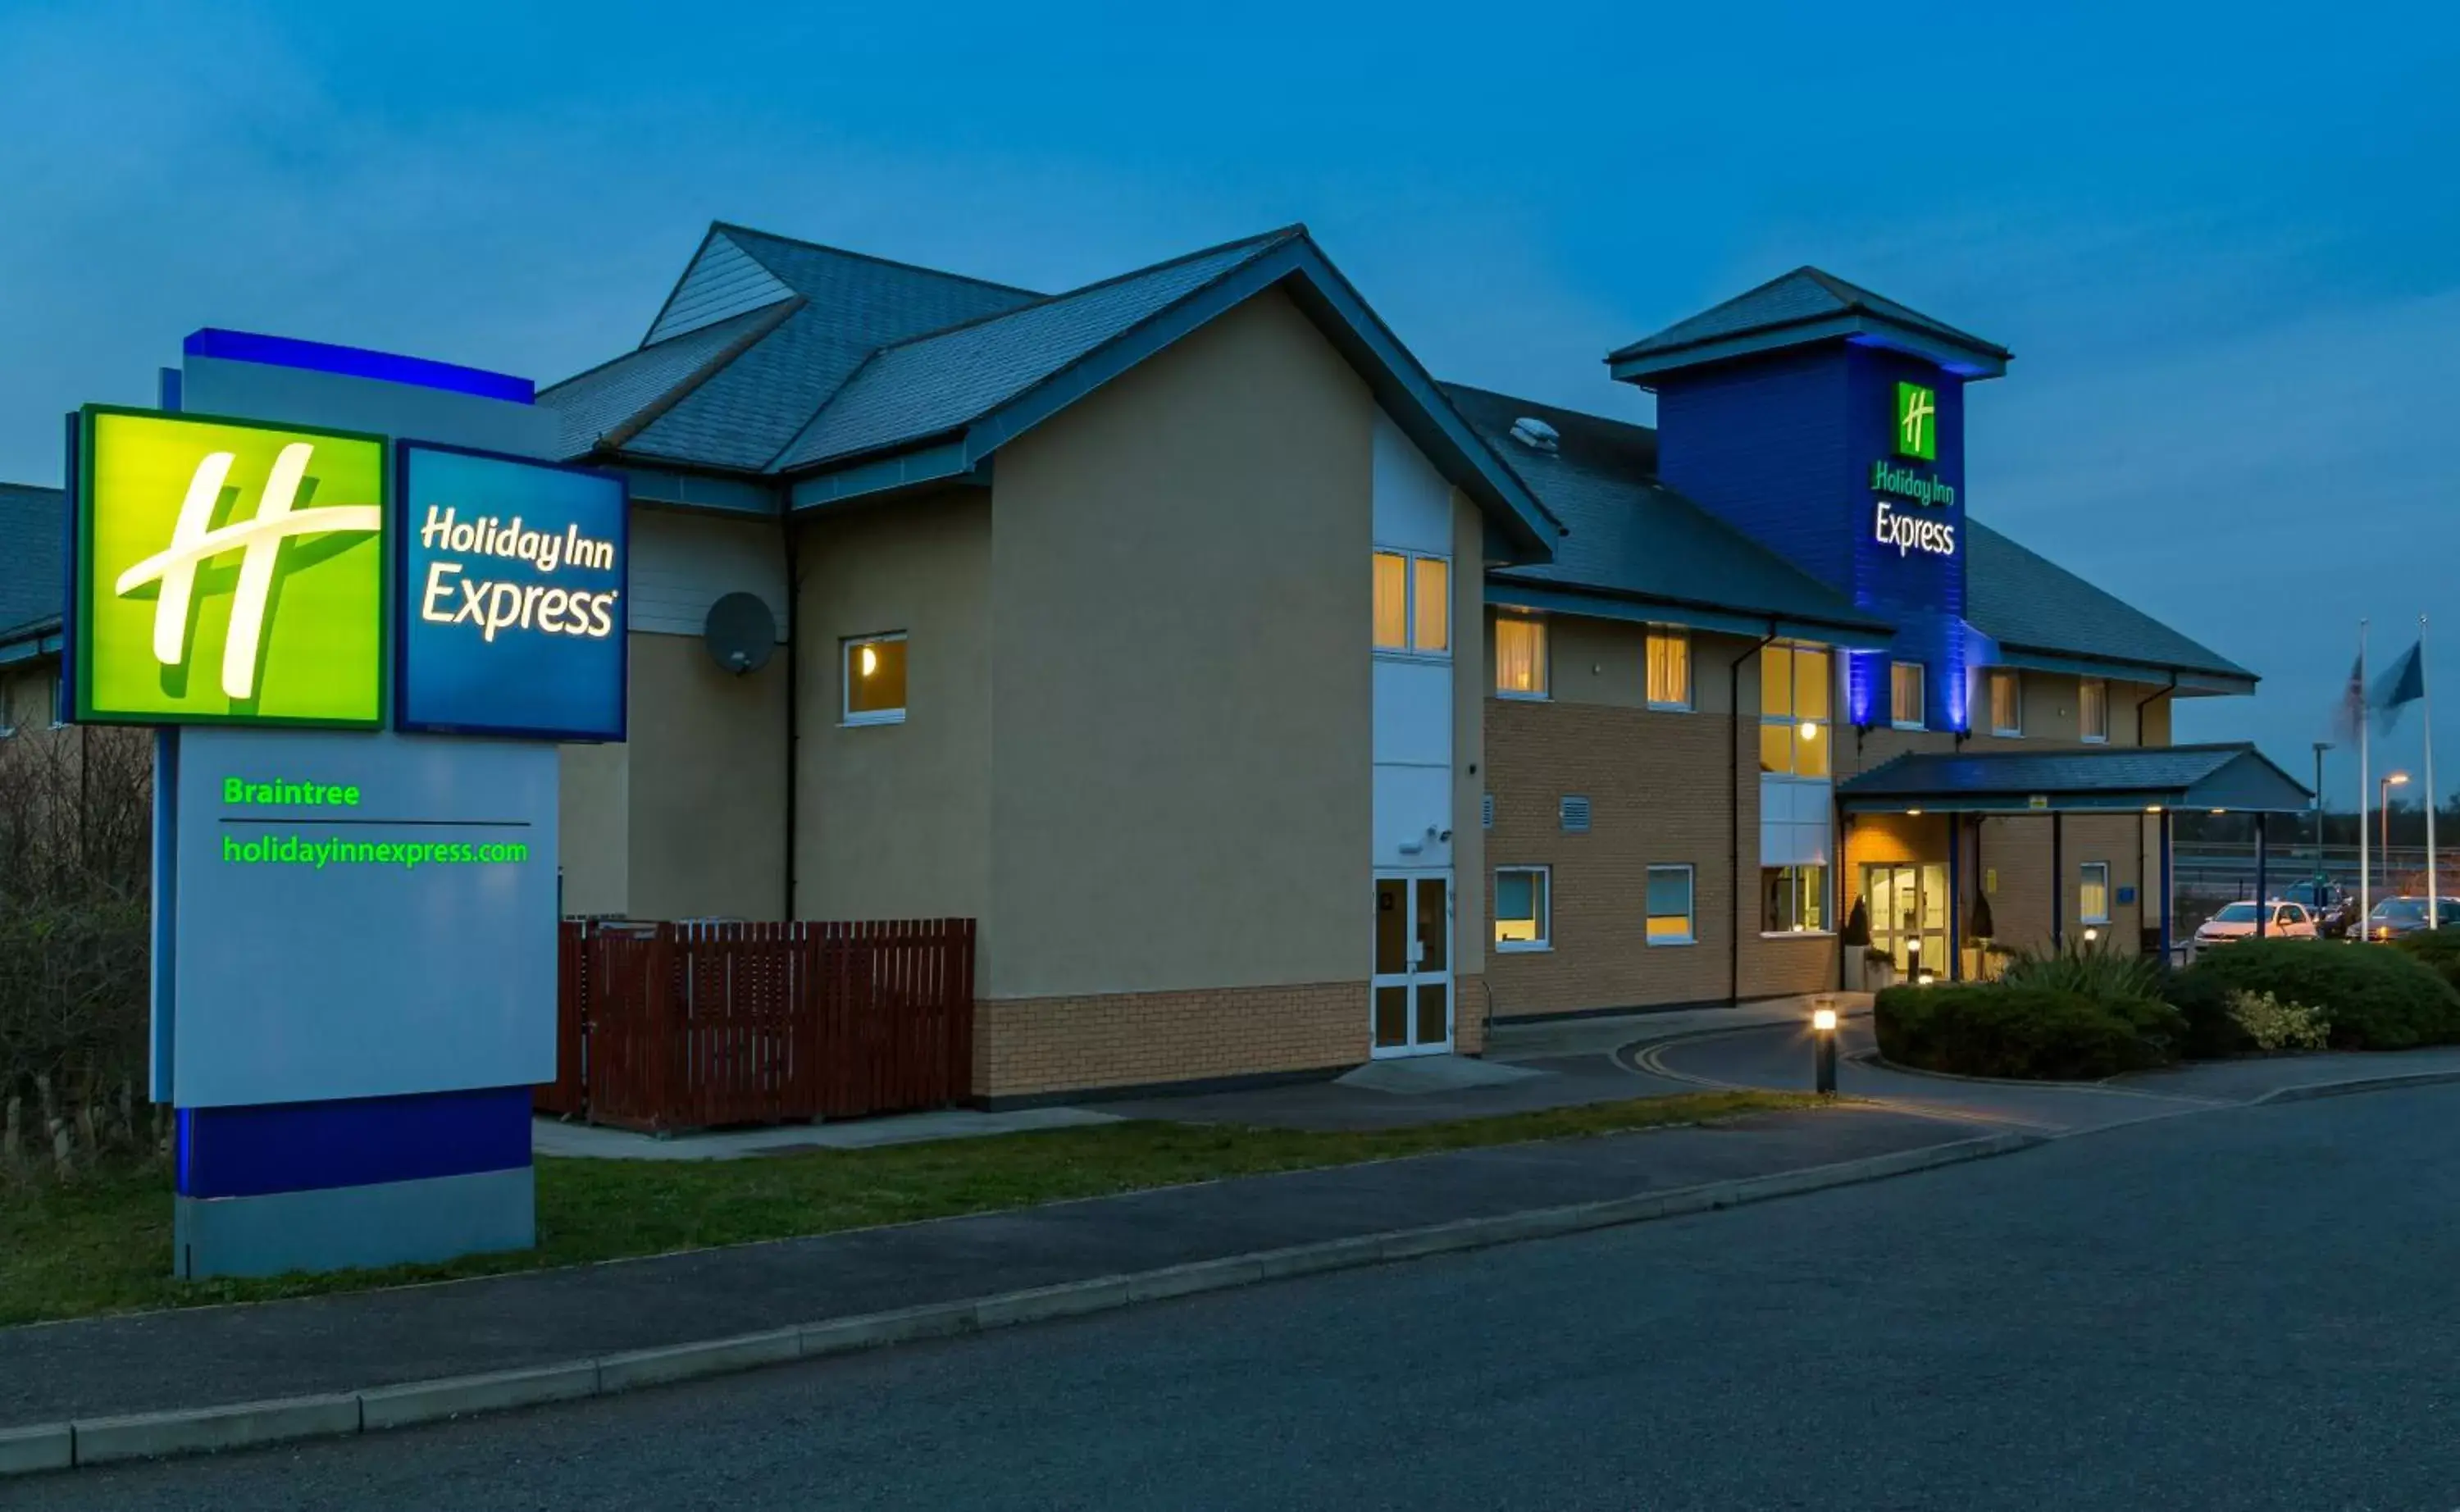 Property building in Holiday Inn Express Braintree, an IHG Hotel